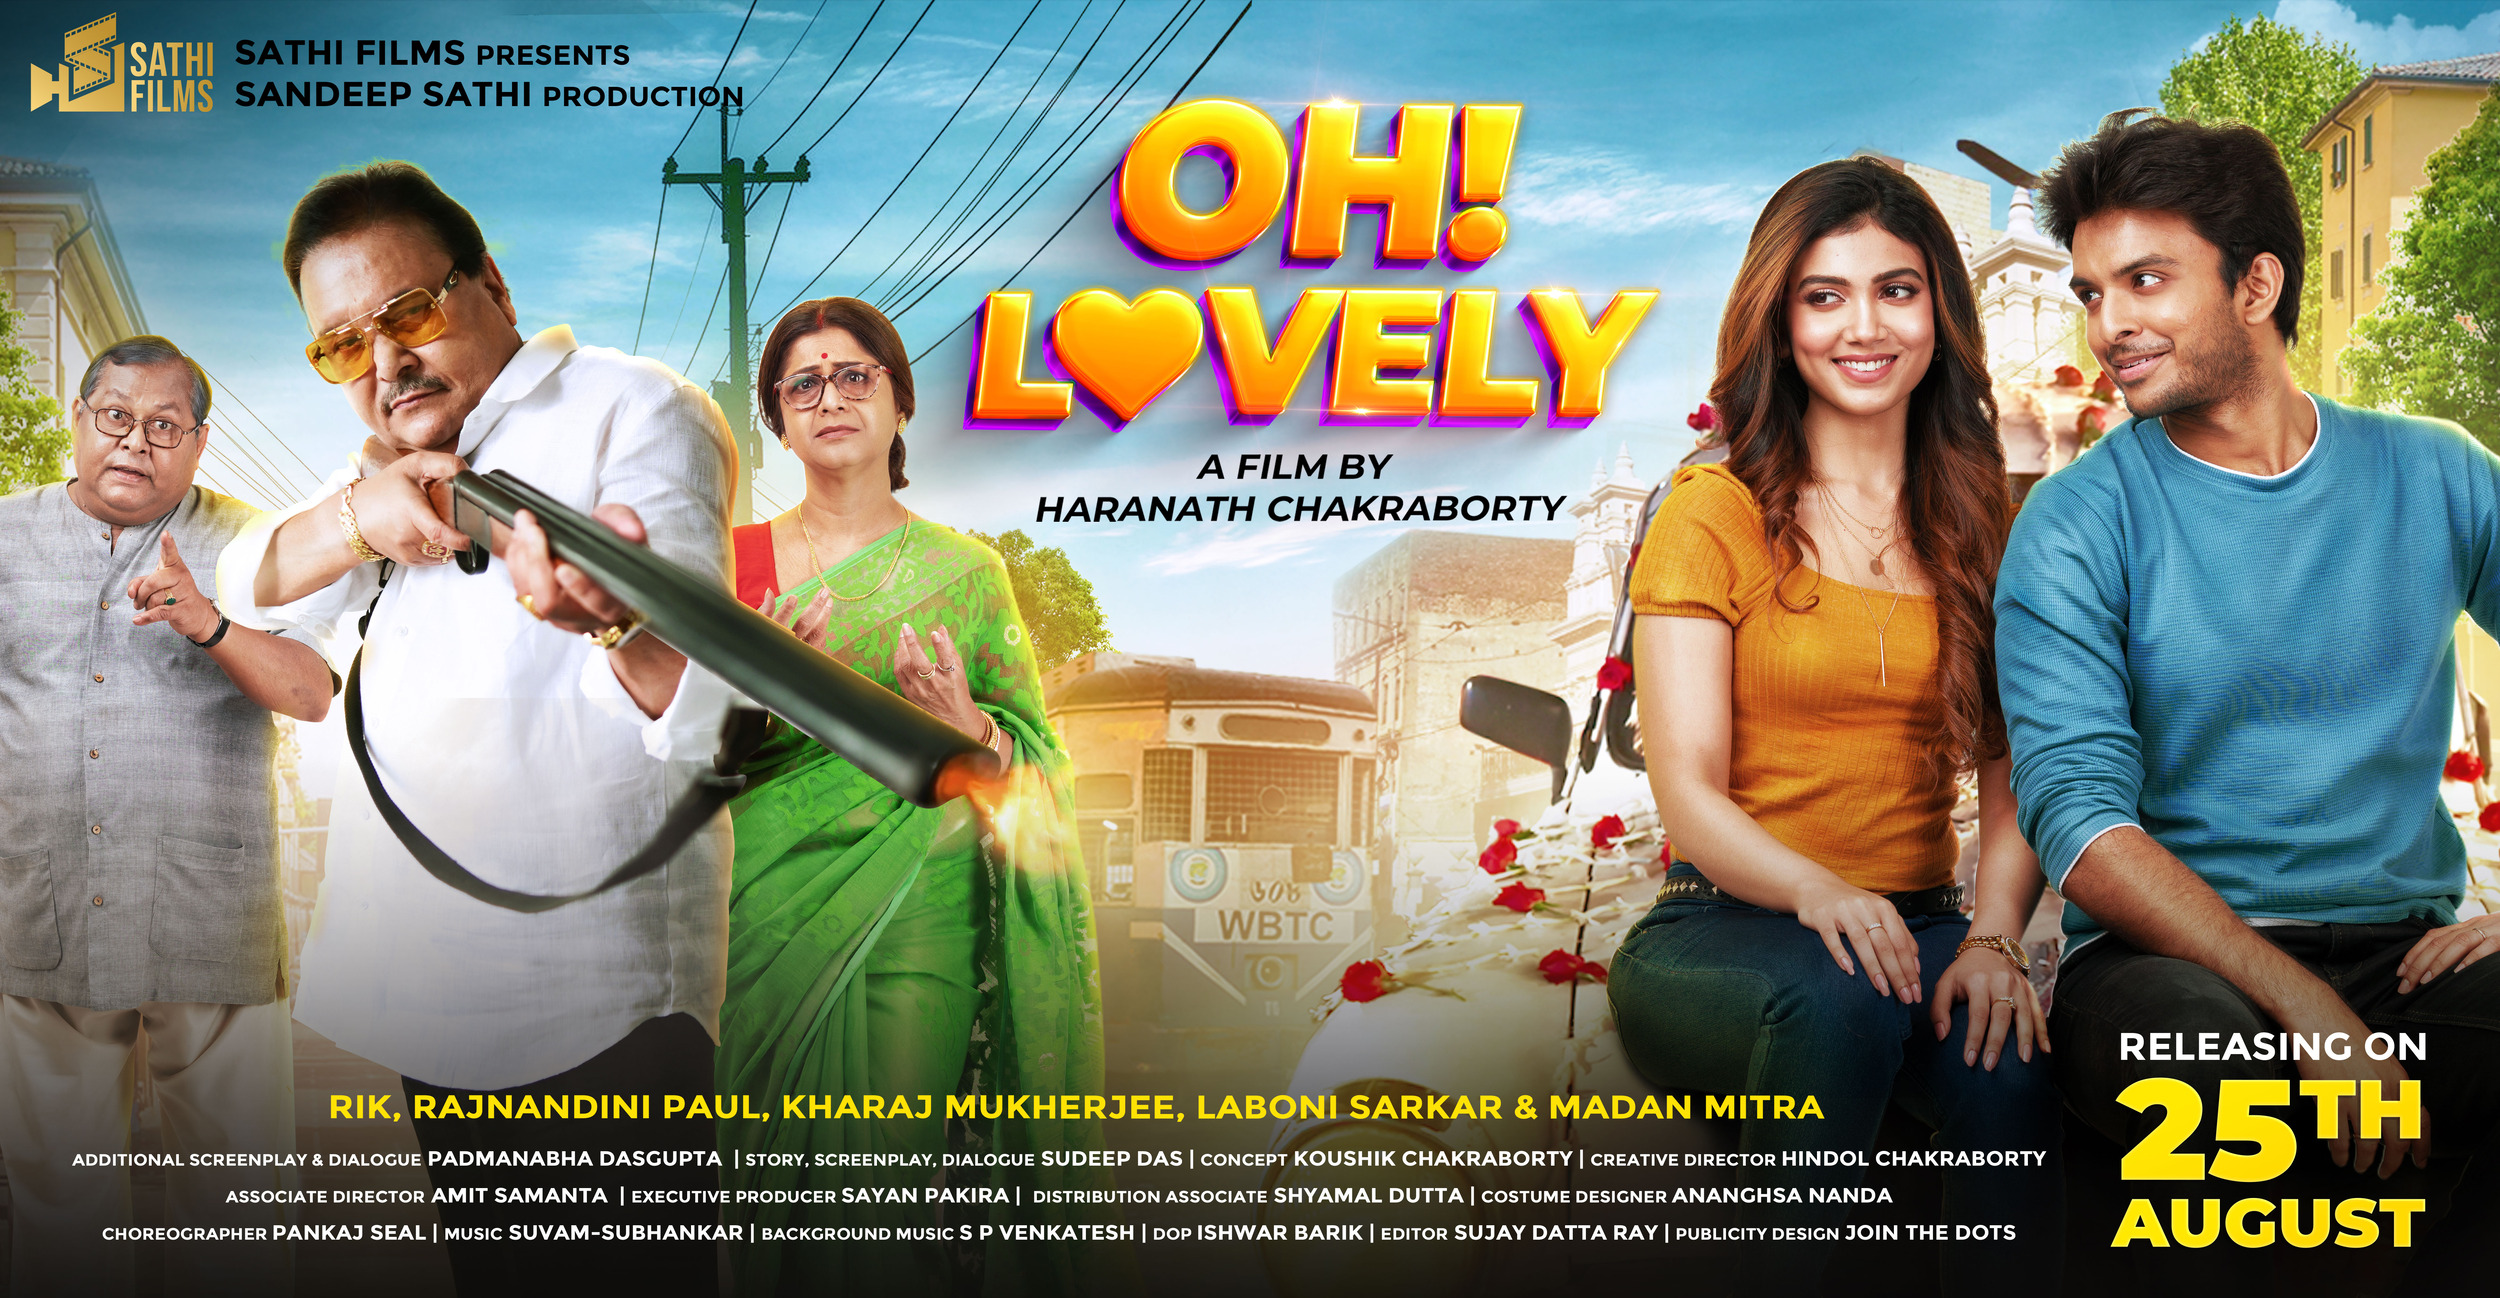 Mega Sized Movie Poster Image for Oh Lovely (#3 of 4)